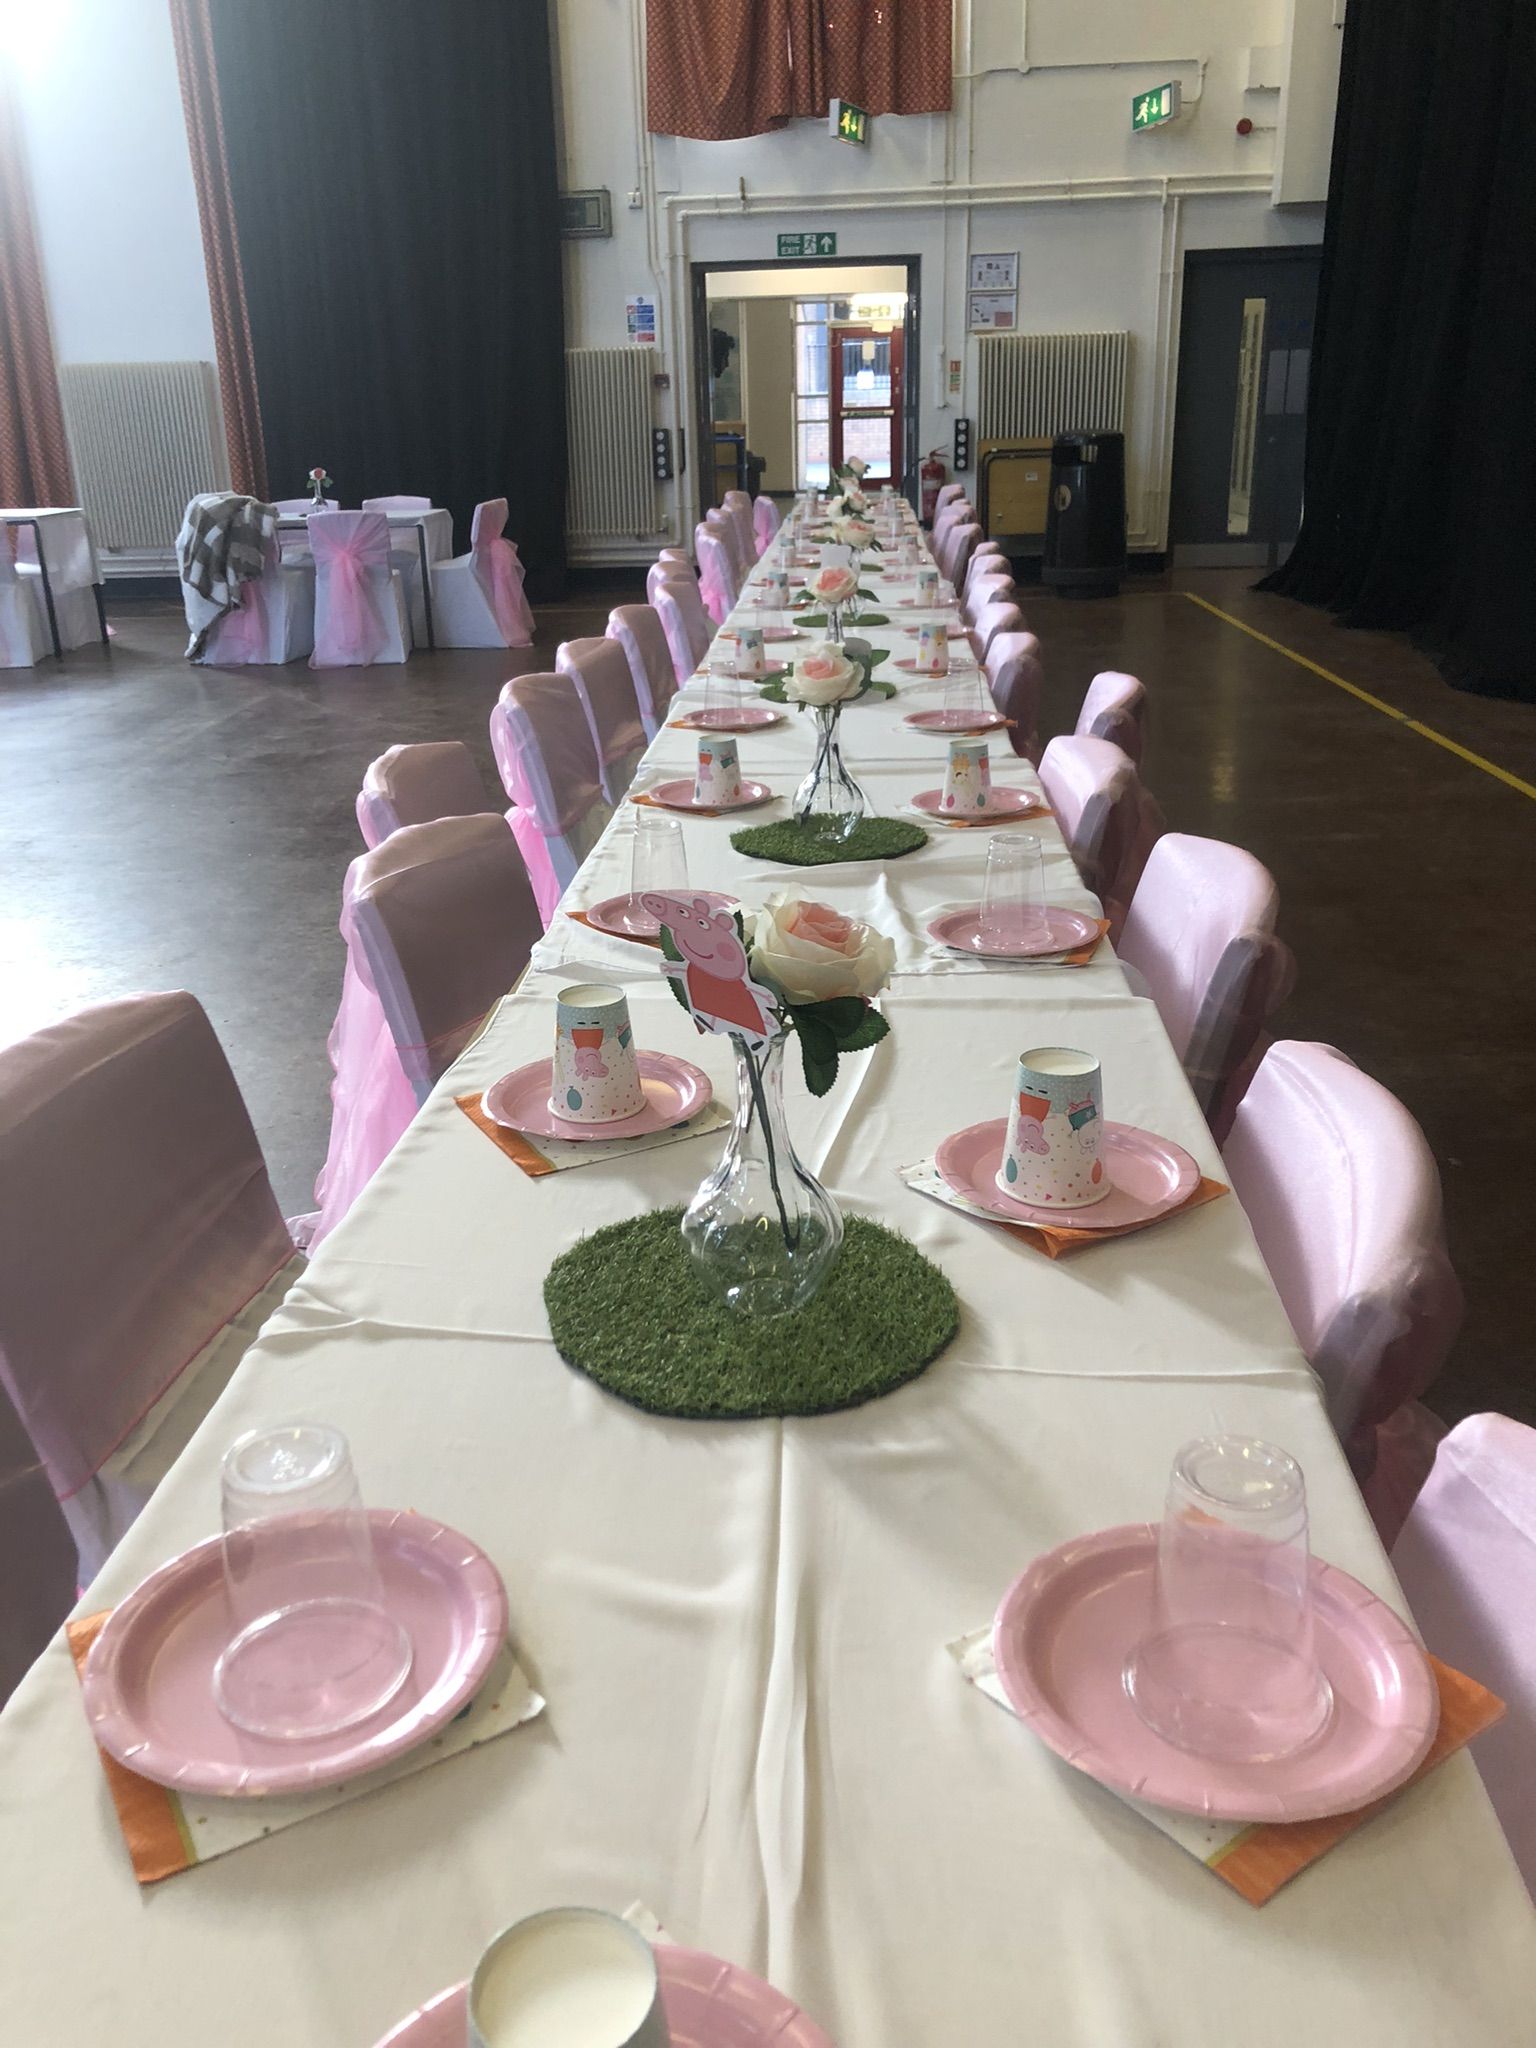 a long table is set with pink and white plates.